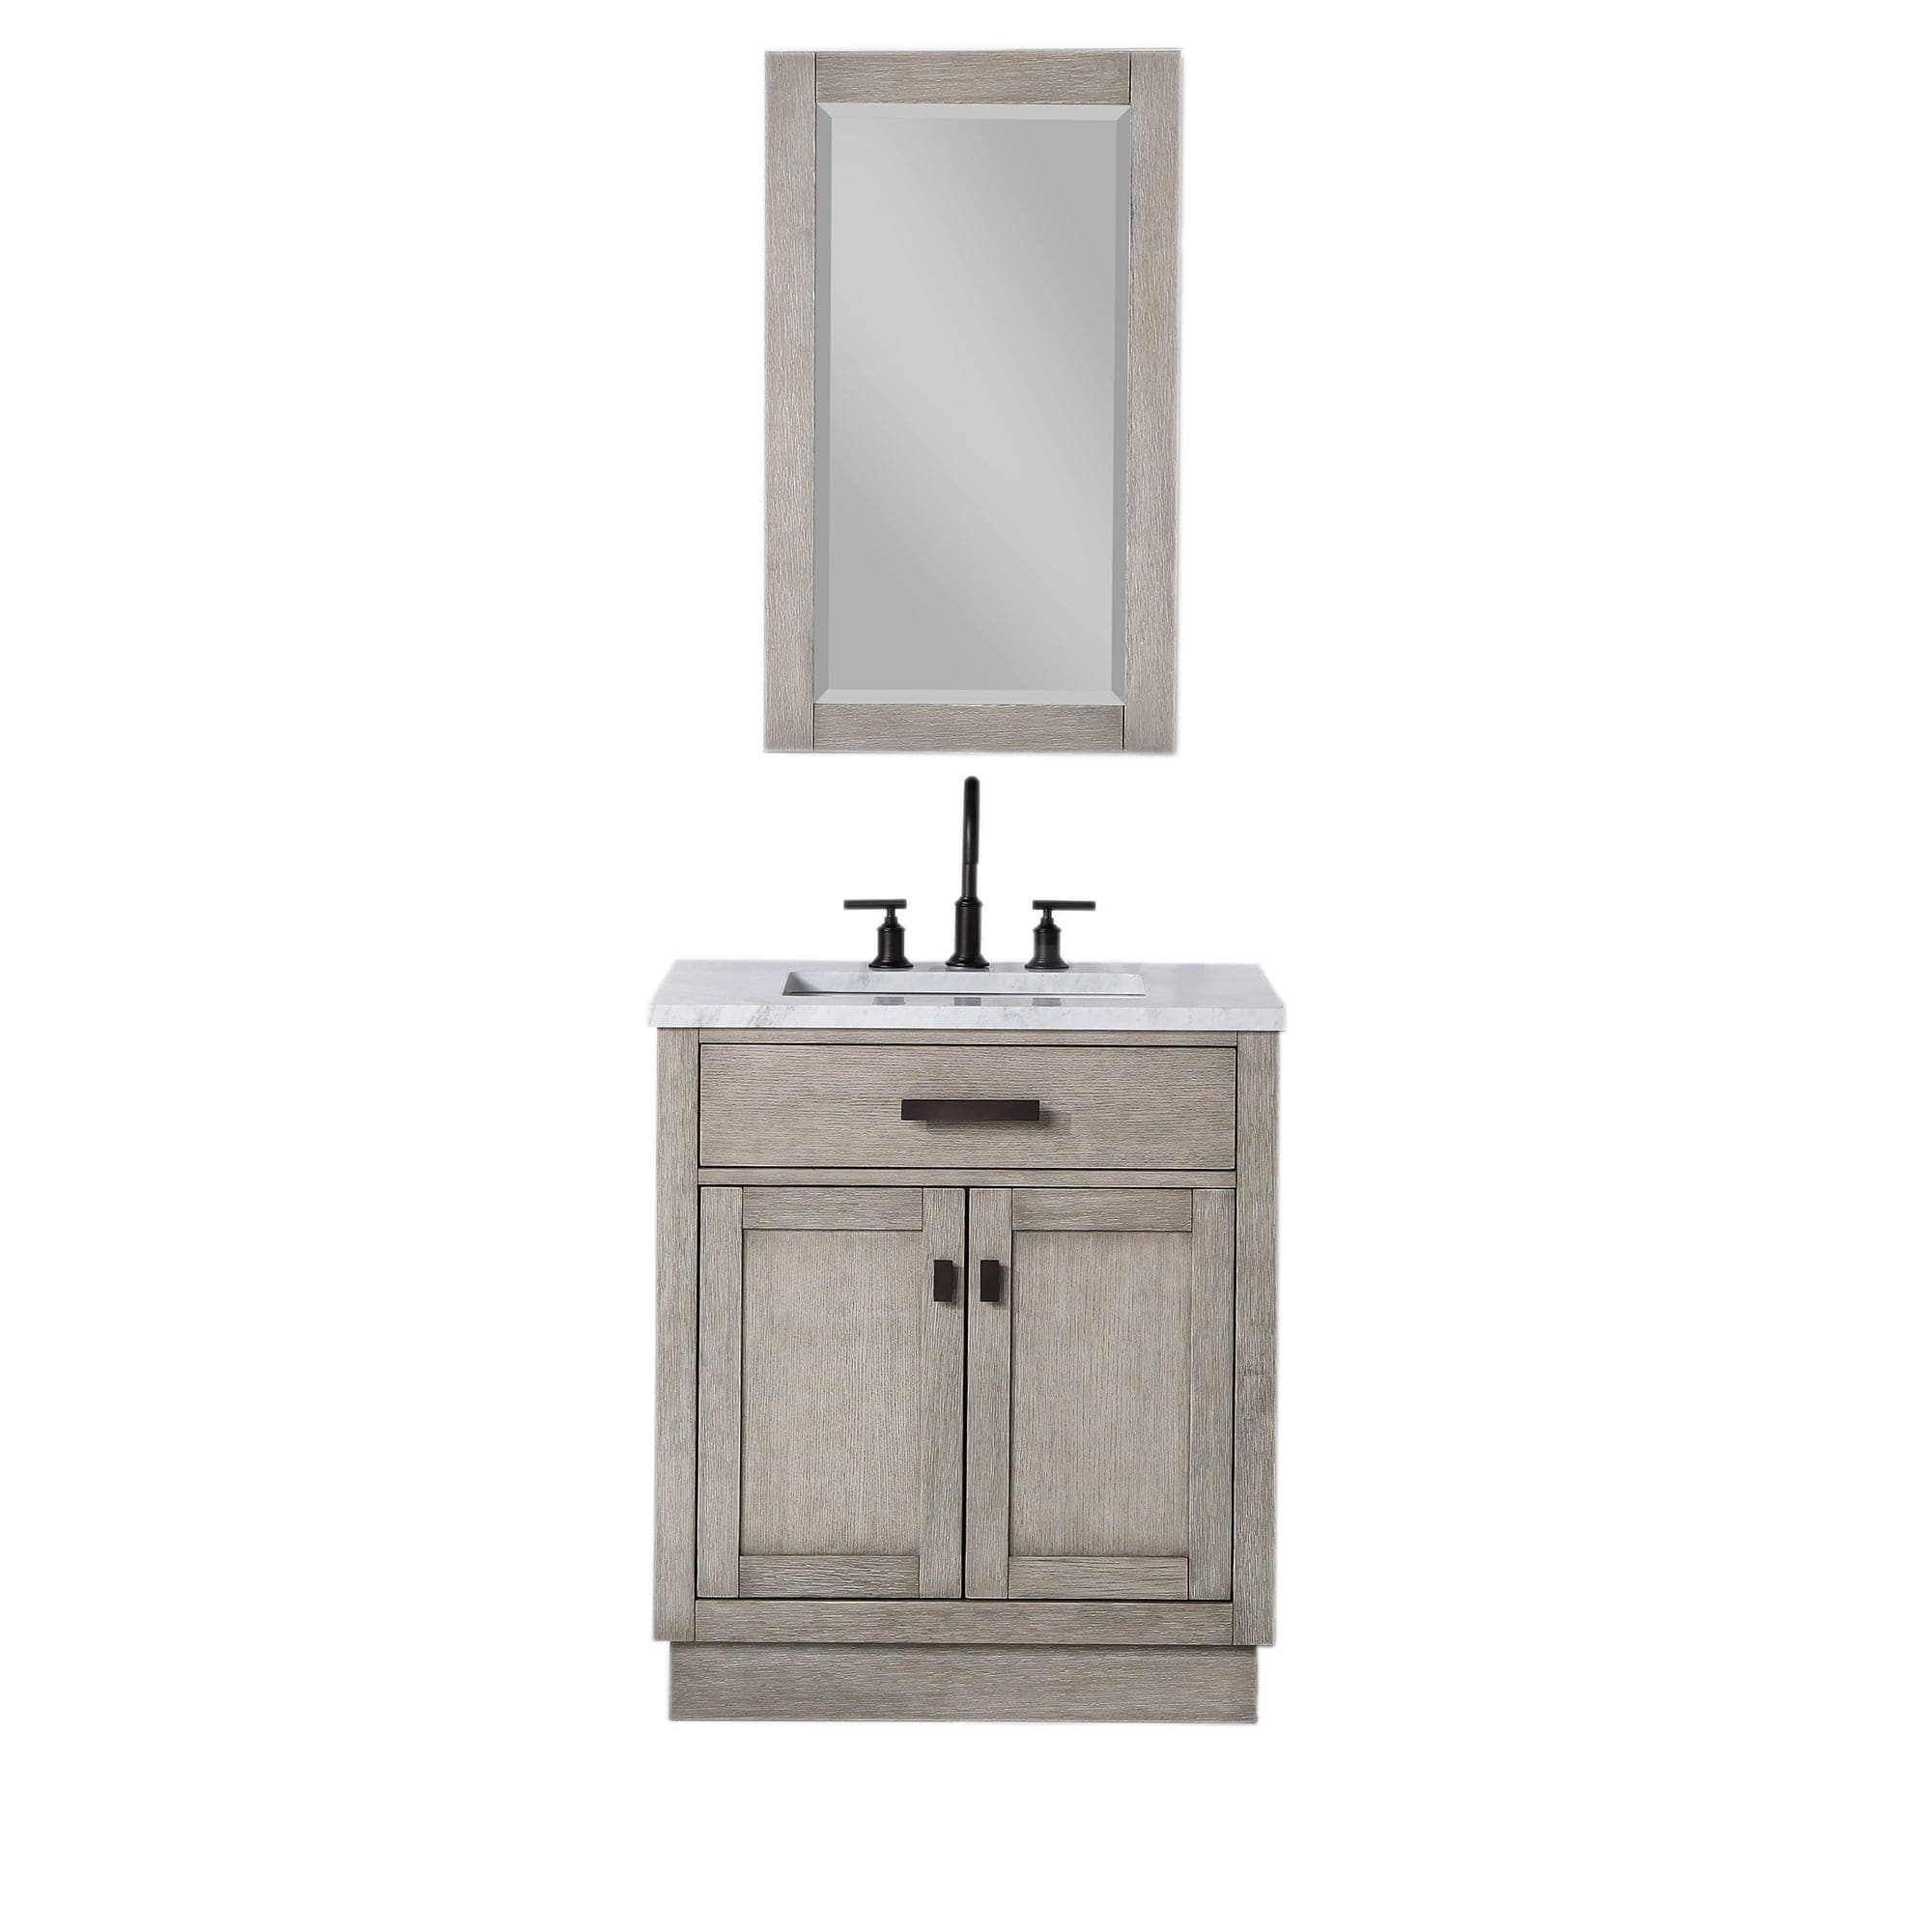 Chestnut 30 In. Single Sink Carrara White Marble Countertop Vanity In Grey Oak with Mirror - Molaix732030764637CH30CW03GK-R21000000